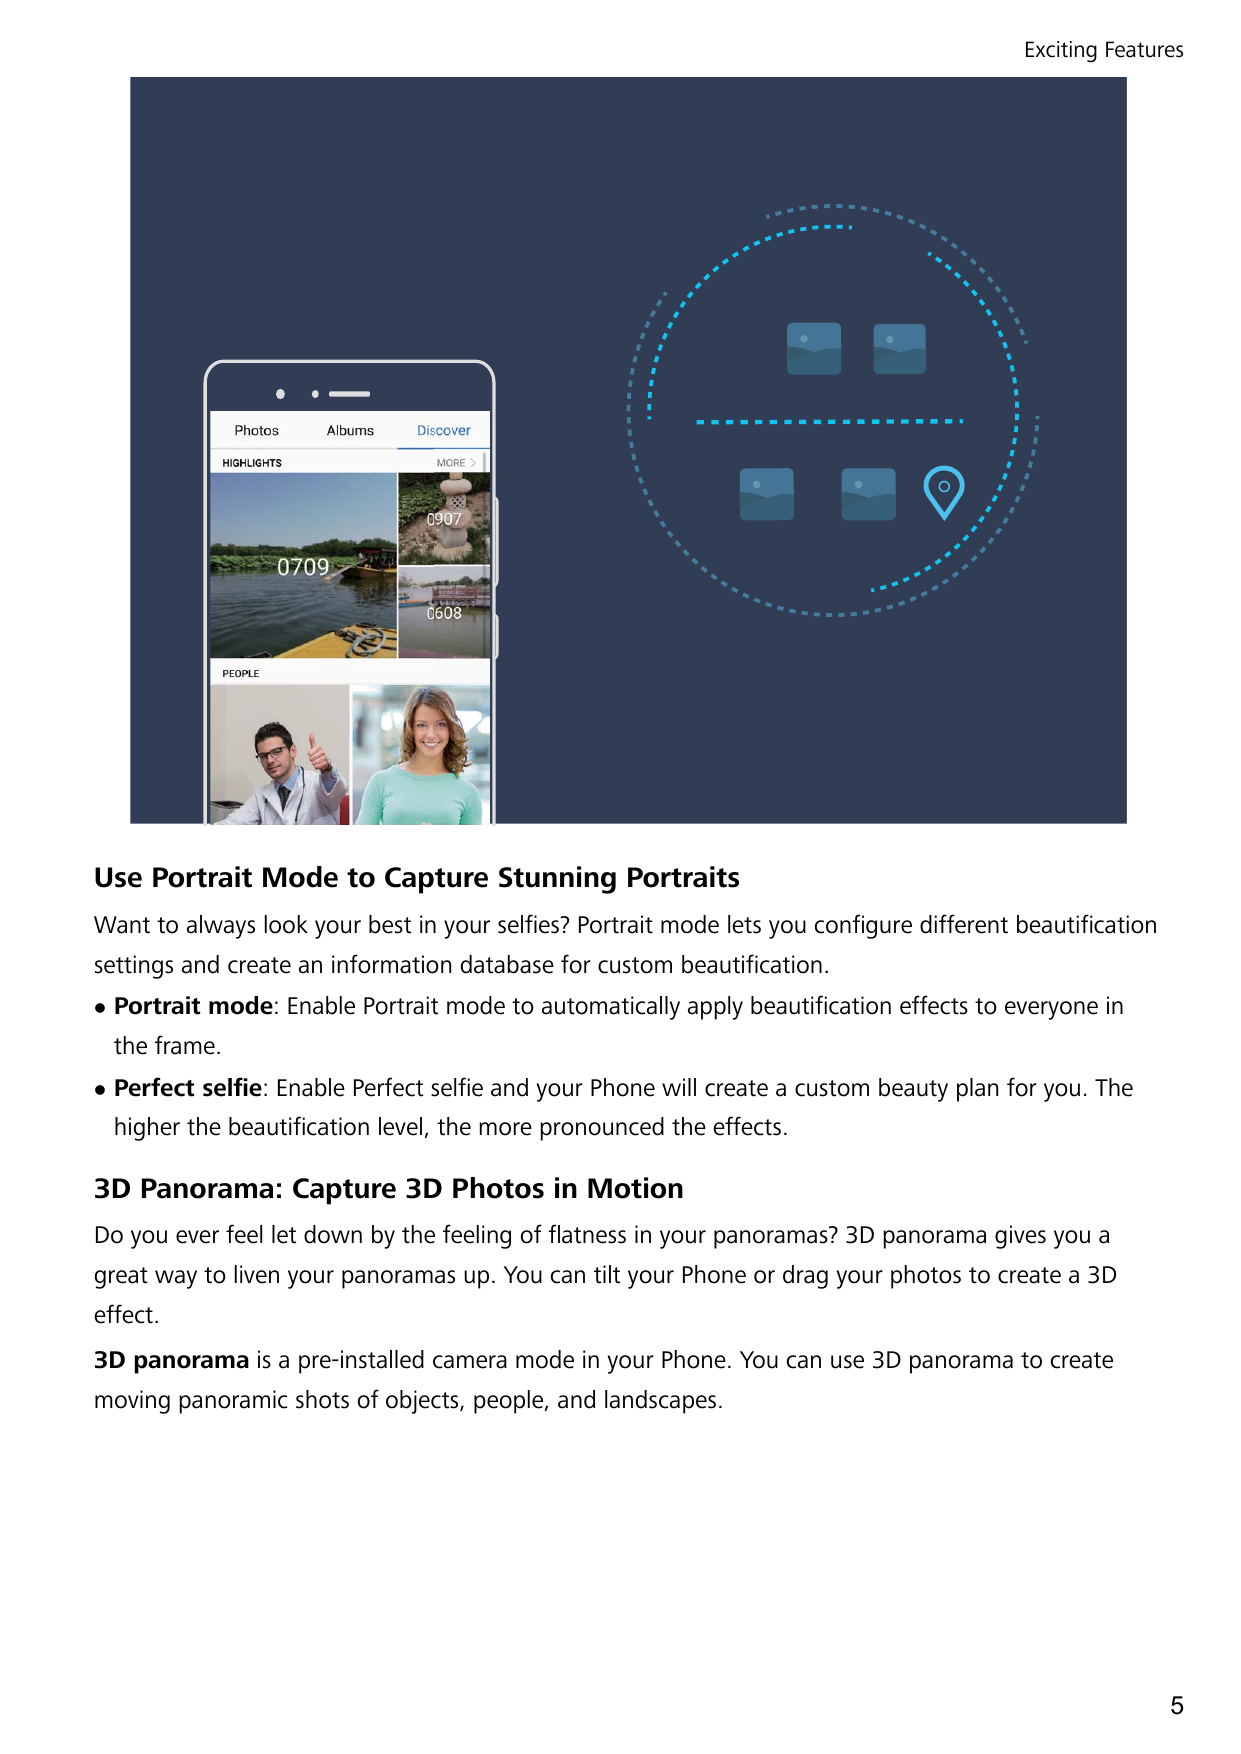 Exciting FeaturesUse Portrait Mode to Capture Stunning PortraitsWant to always look your best in your selfies? Portrait mode let